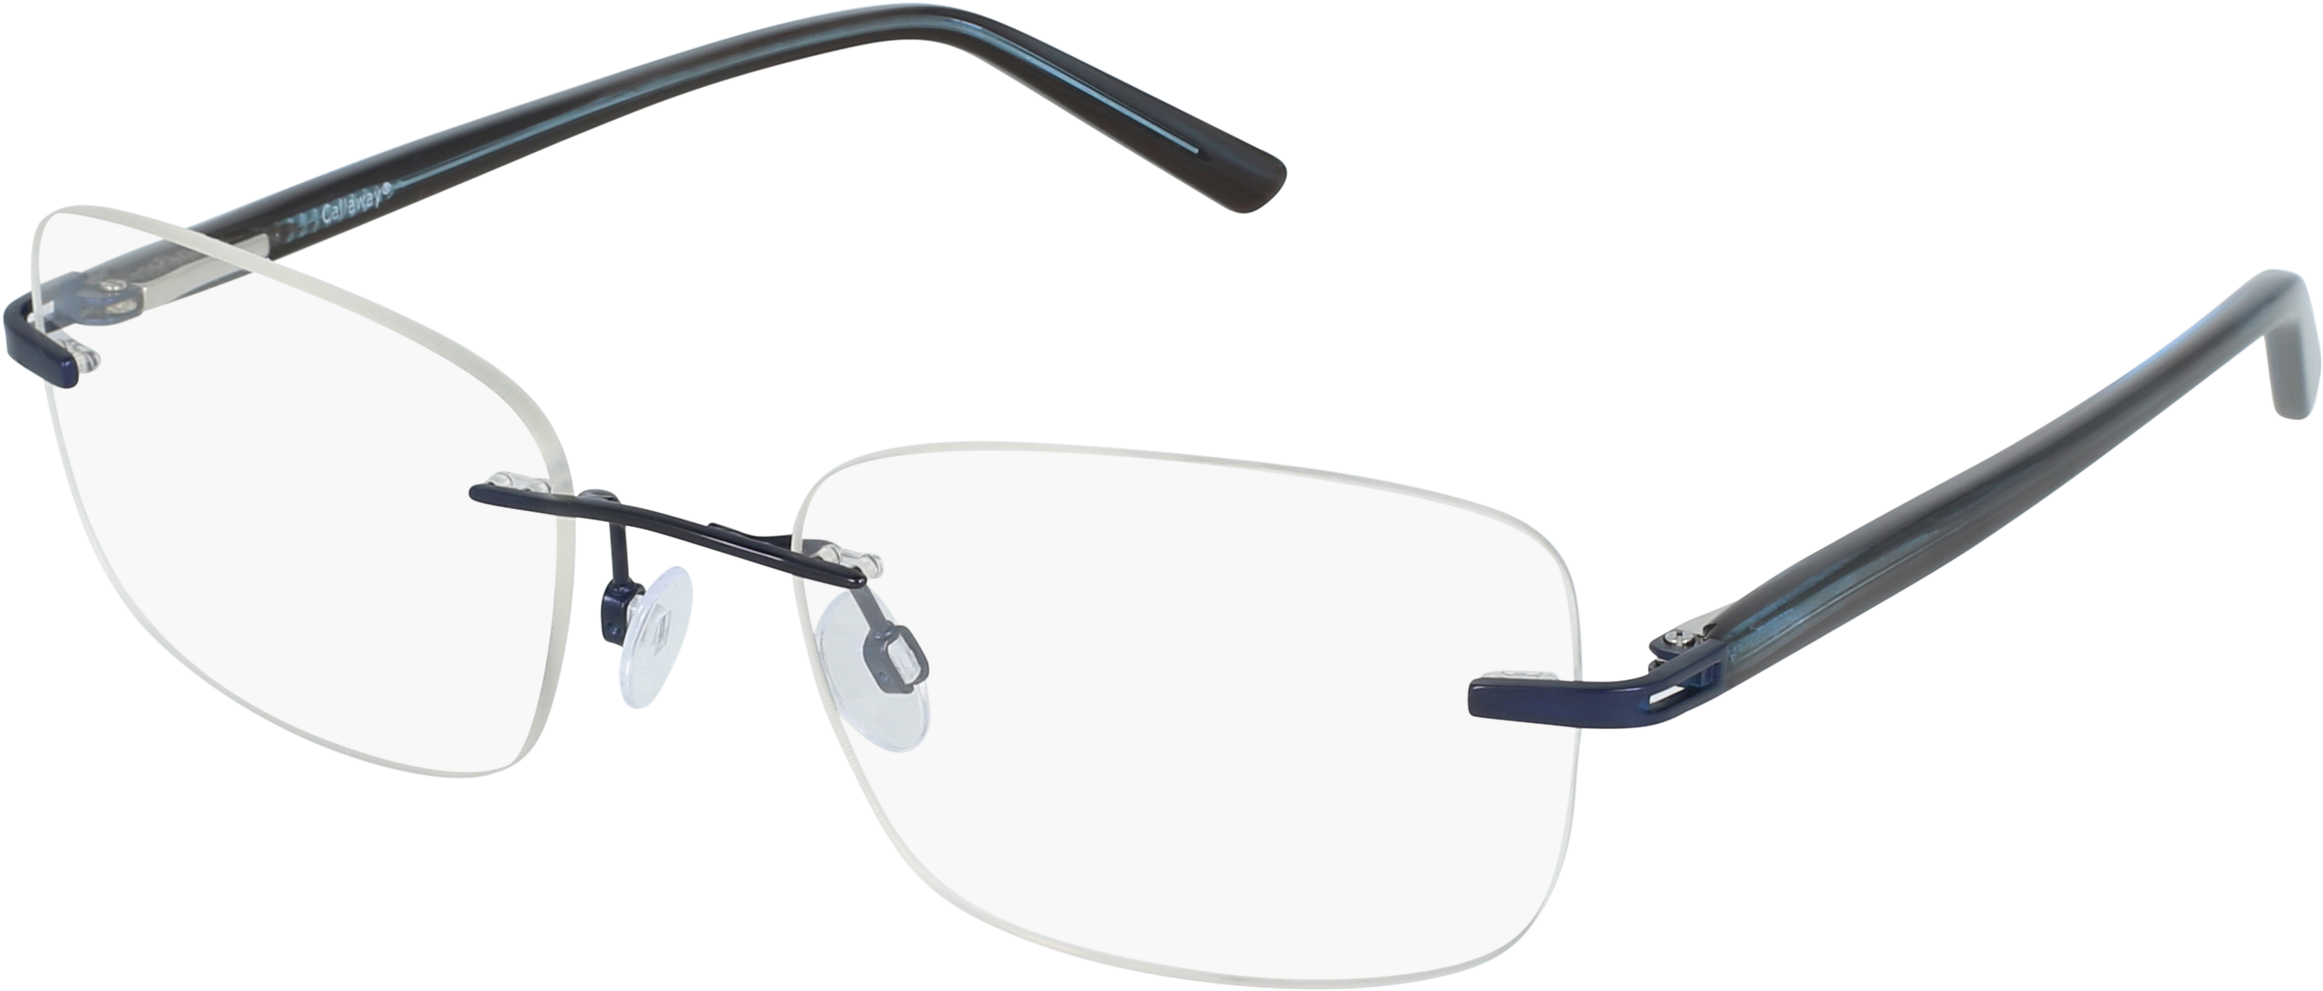 A Pair Of Glasses With A Black Frame